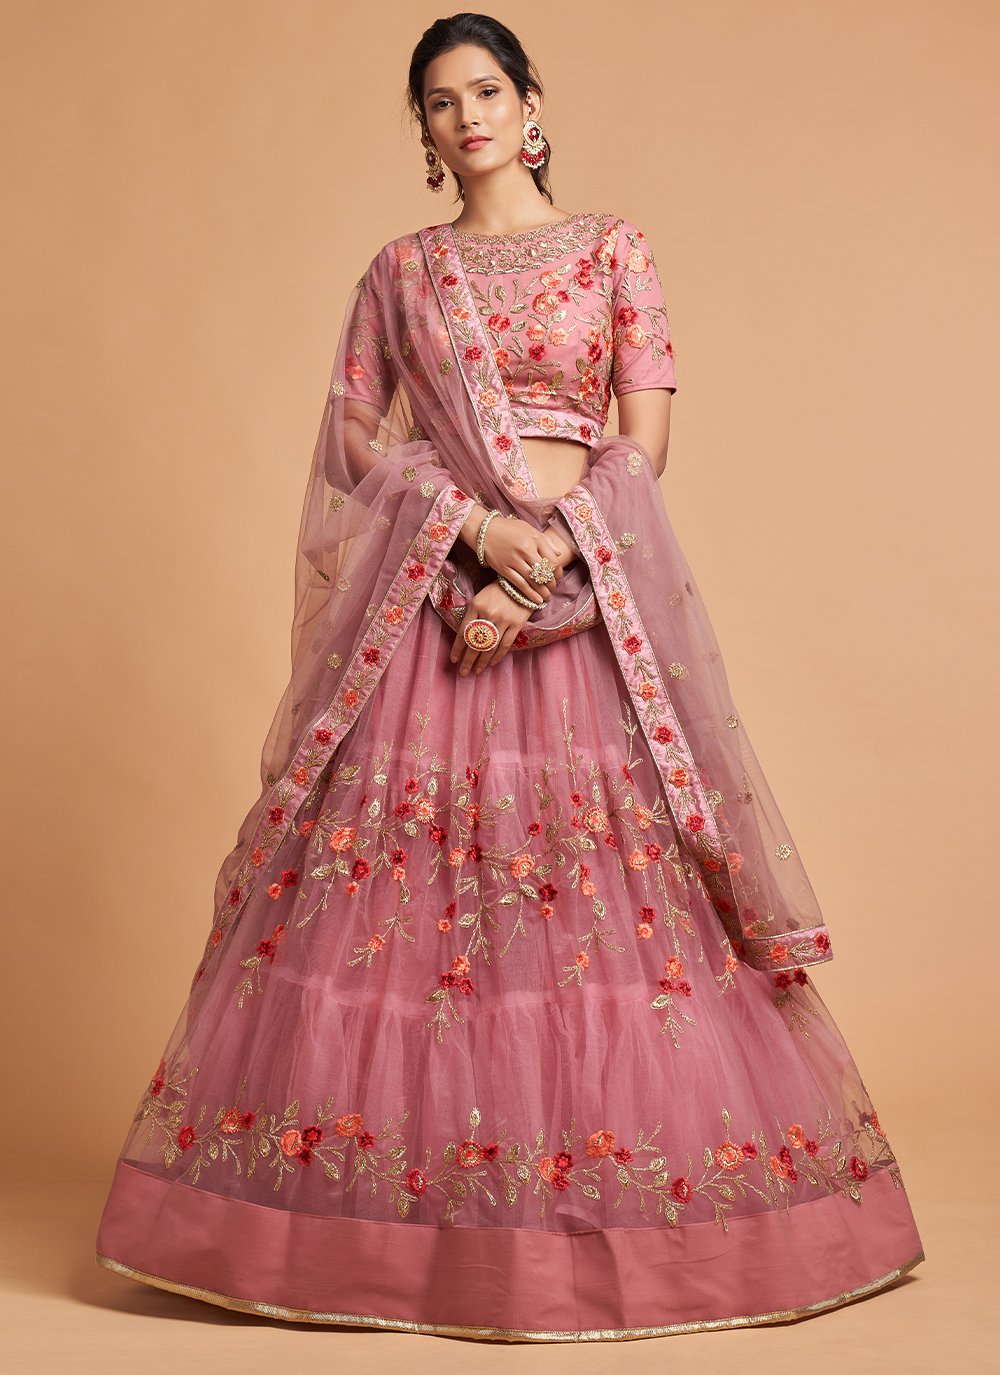 Lehenga For Sisters Wedding With Price Buy Online Collection